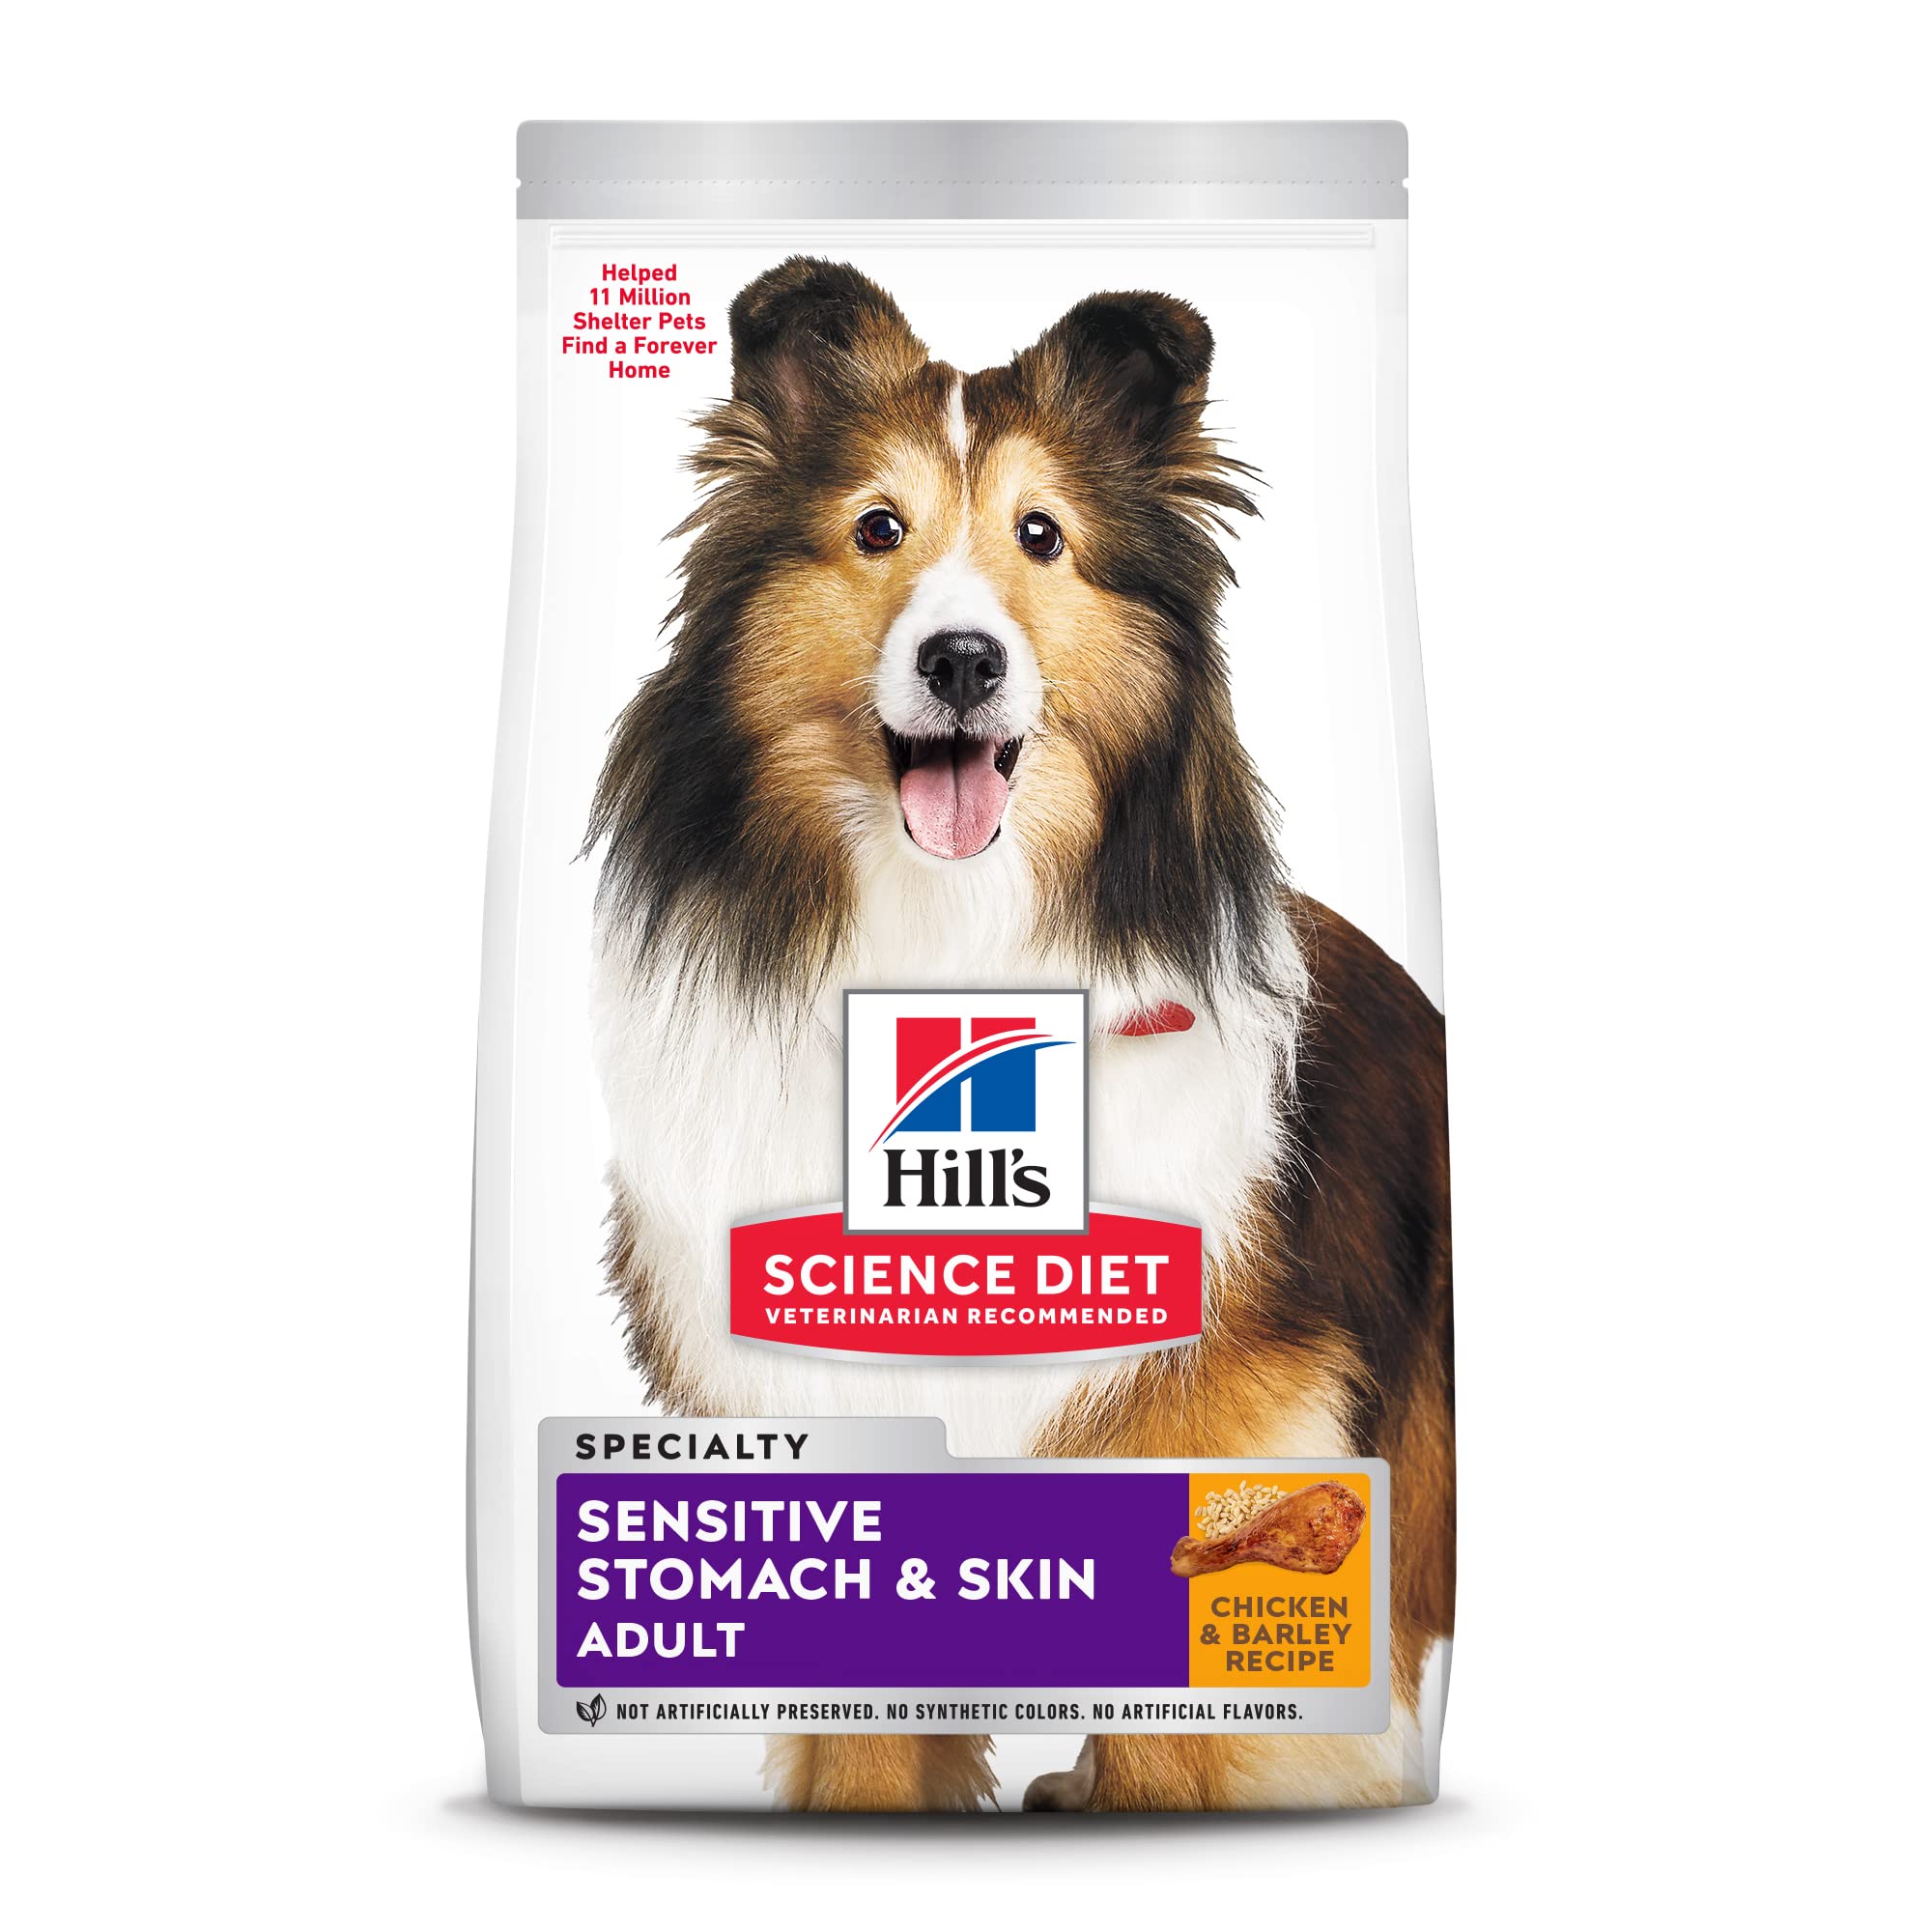 Hill's Science Diet Dry Dog Food, Adult, Sensitive Stomach & Skin, Chicken Recipe, 30 lb. Bag